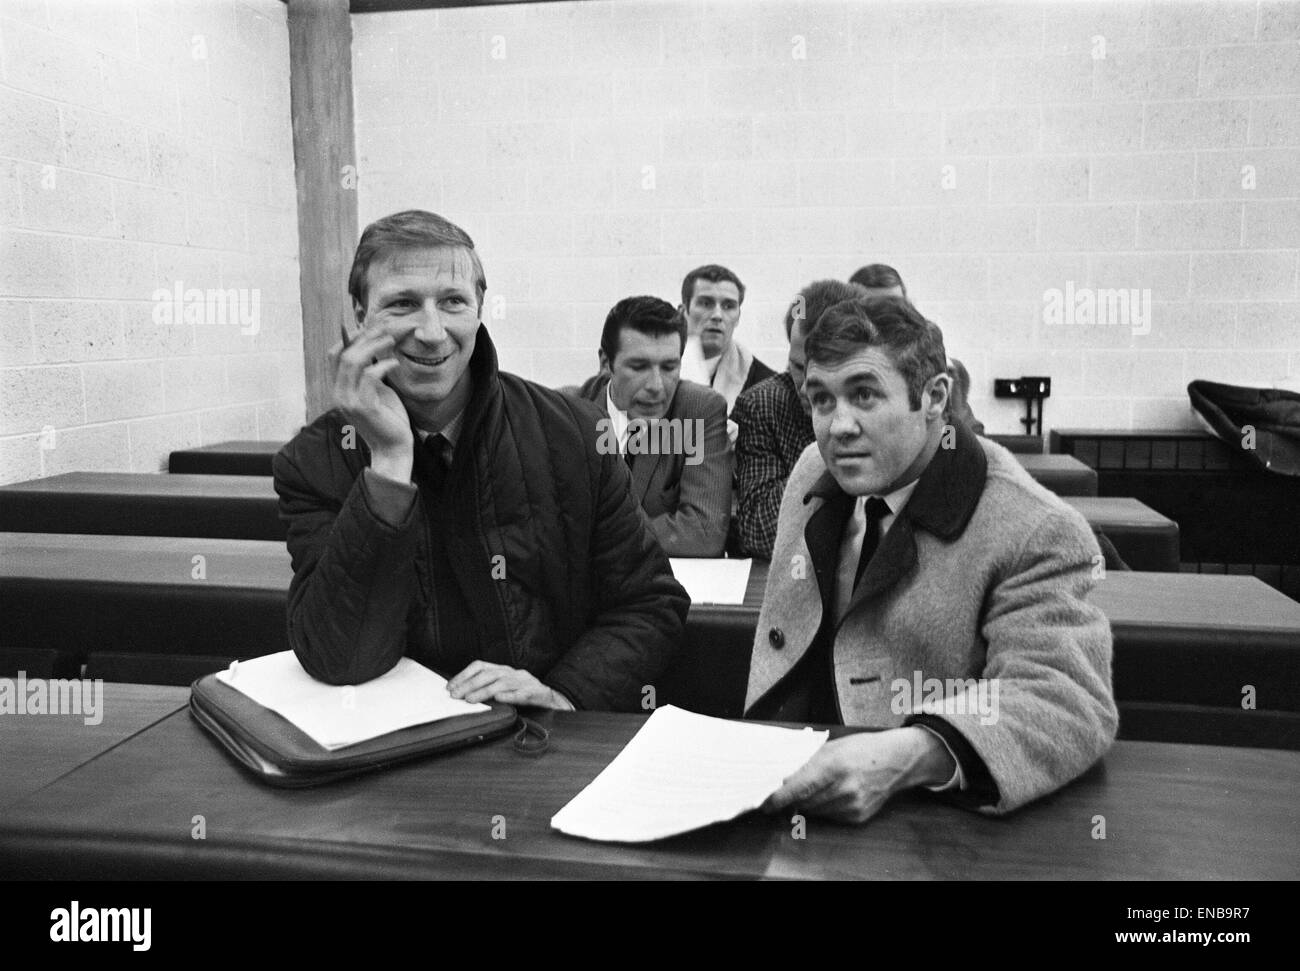 Football Association teach-in at Leeds University with Sheffield United manager John Harris, Leeds manager Don Revie and Johnny Steele of Barnsley. Jack Charlton and Bobby Collins taking notes. 12th February 1969. Stock Photo